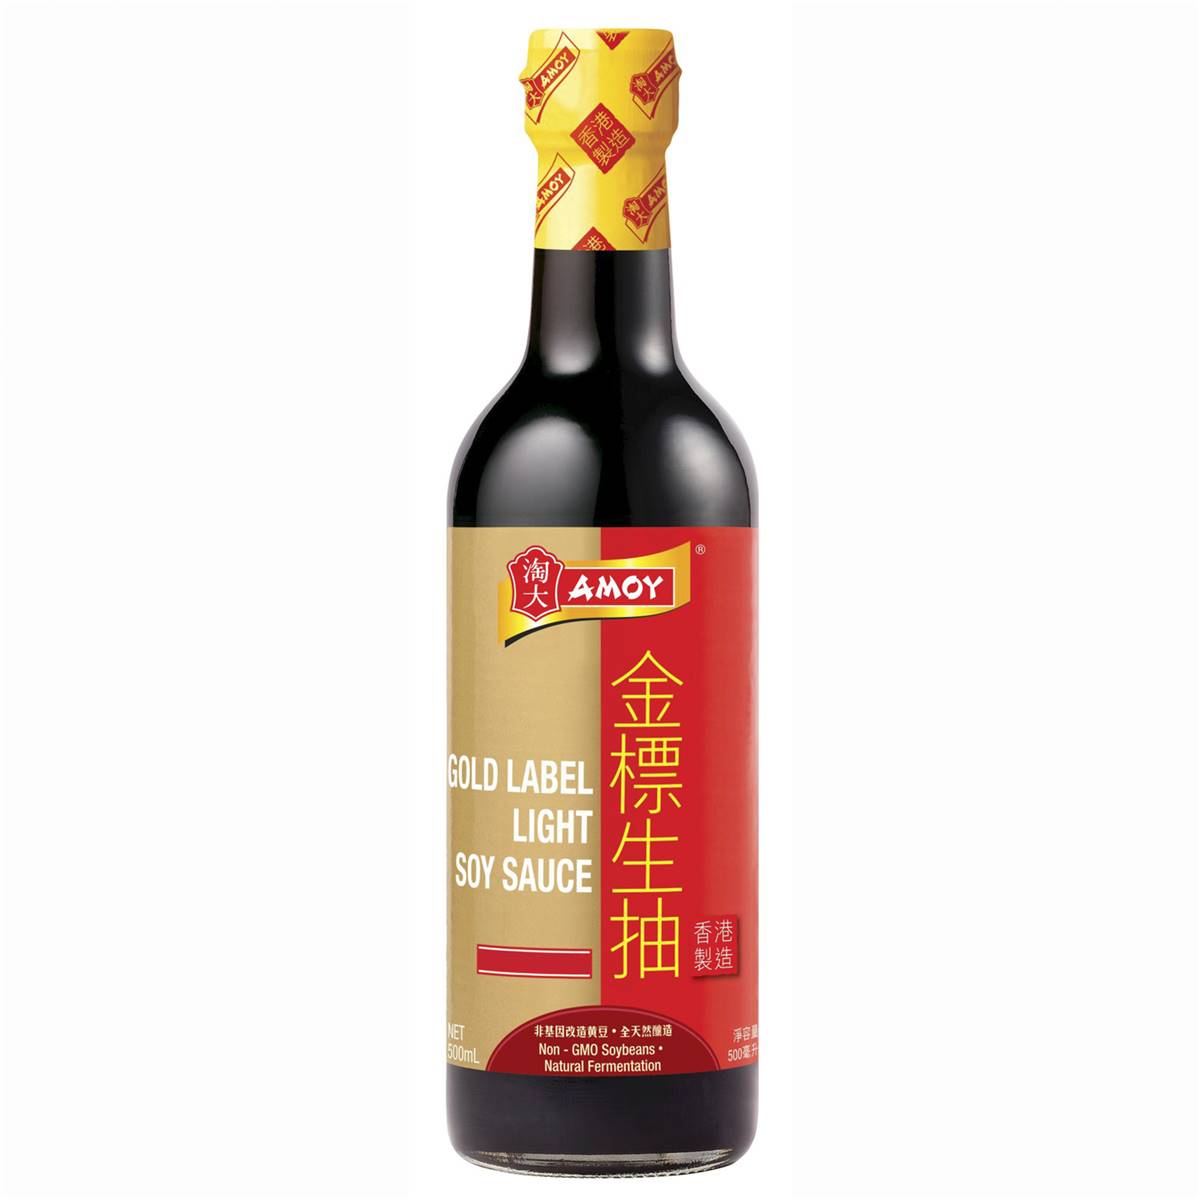 Calories in Amoy Gold Label Light Soy Sauce